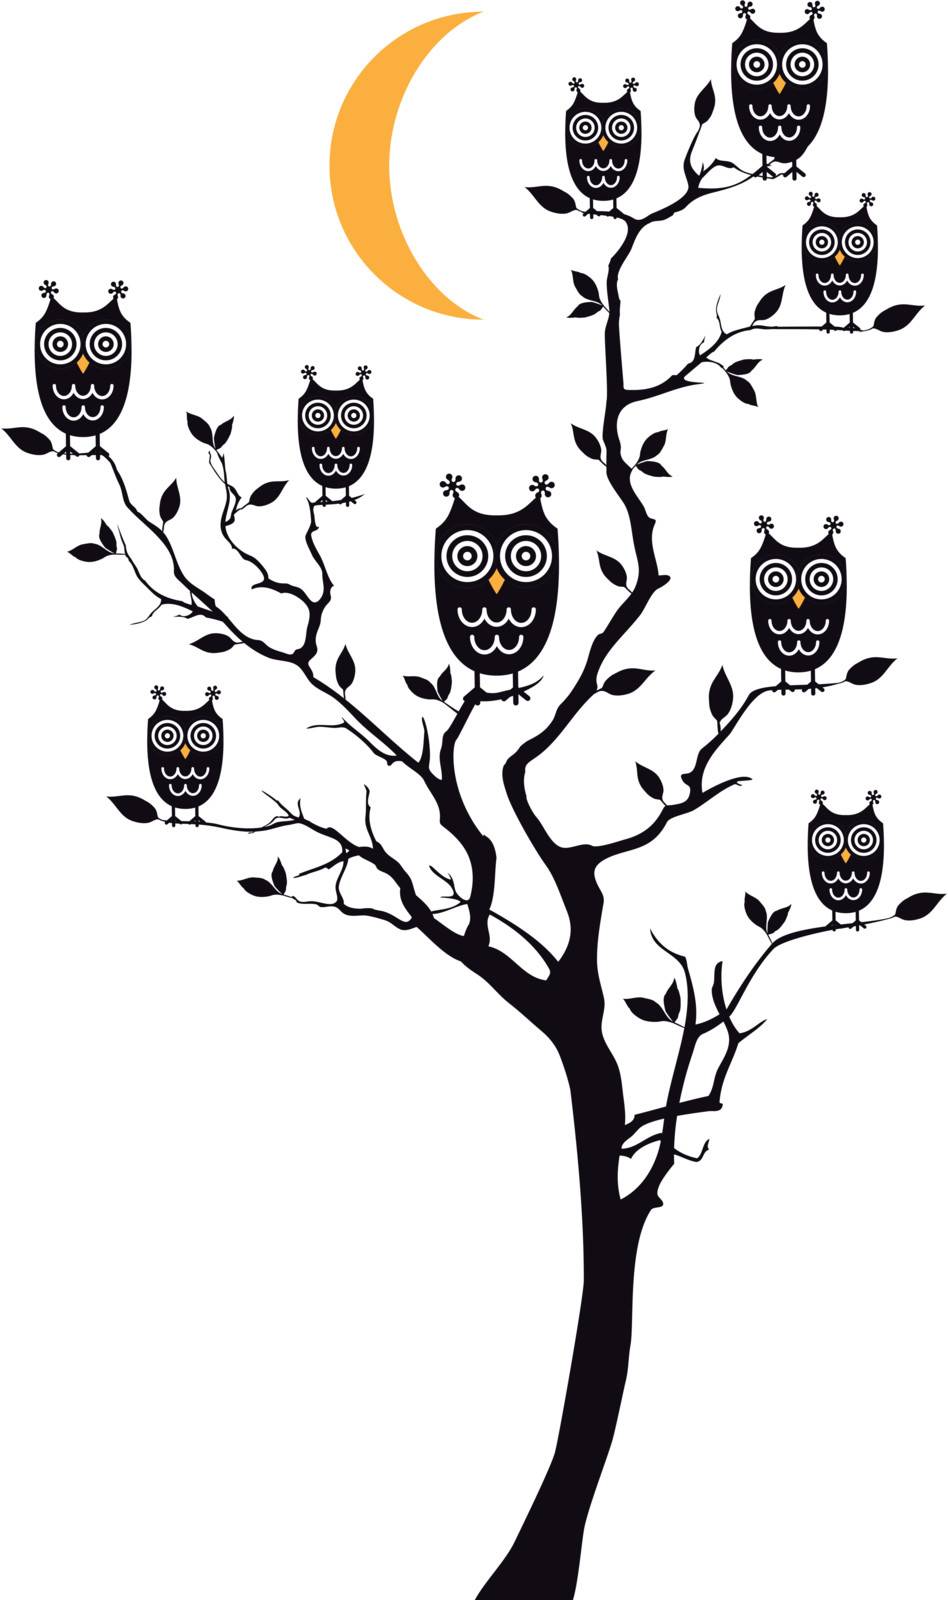 owls sitting on tree branch, vector background